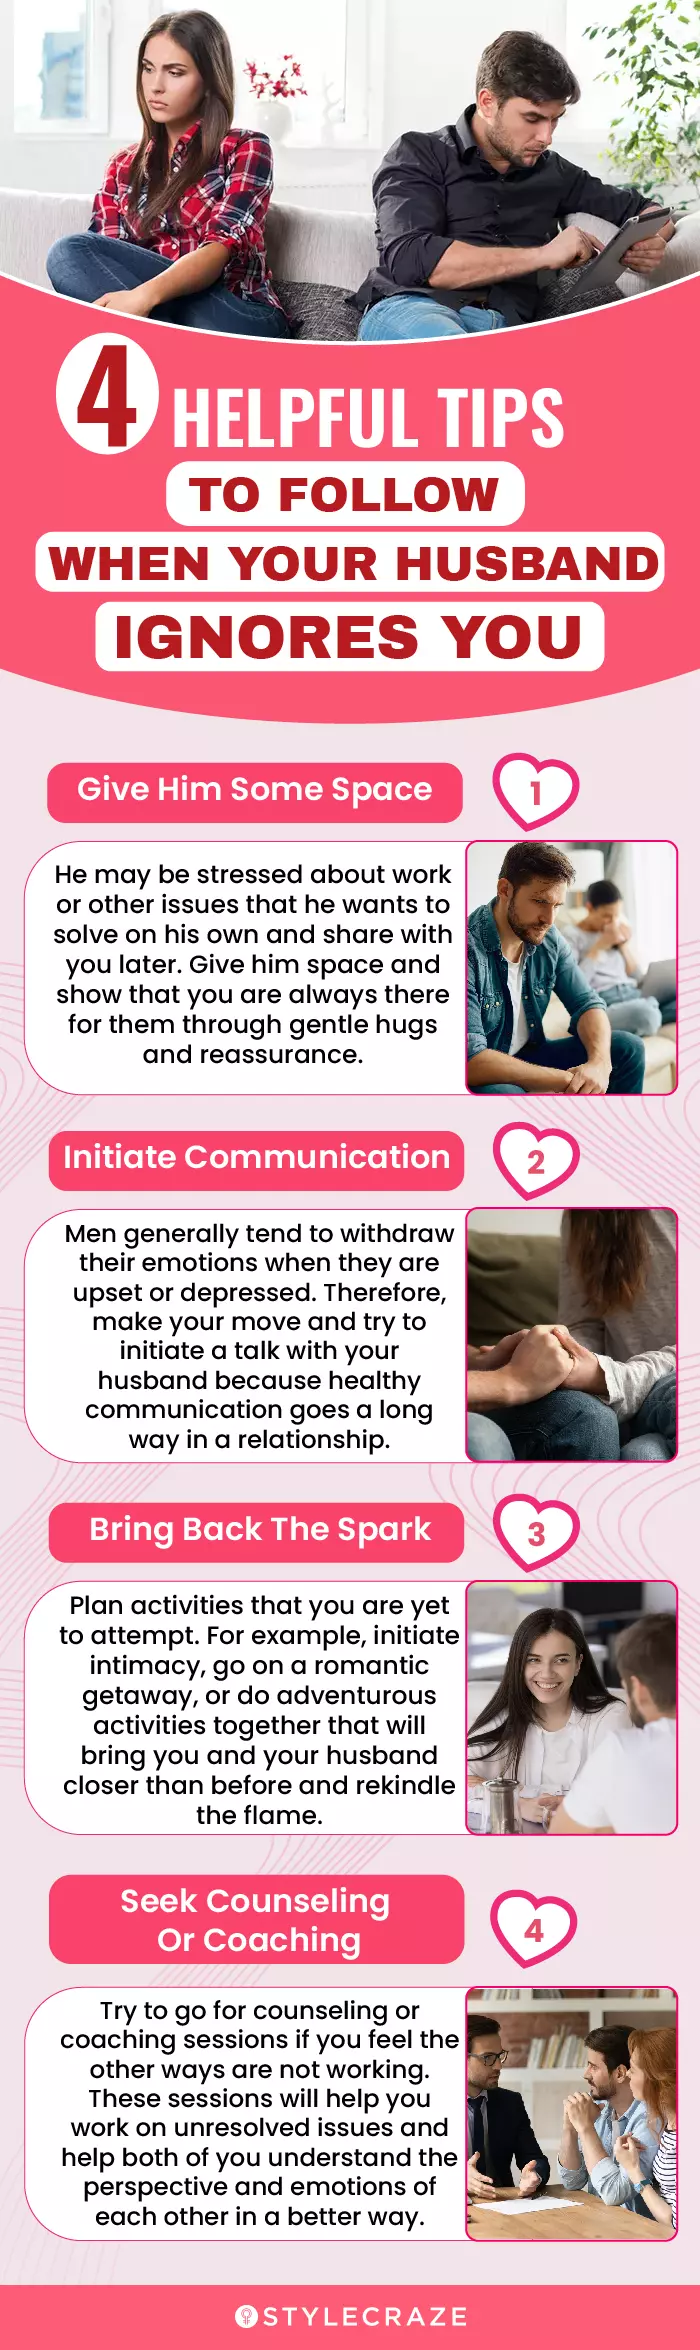 4 helpful ways when your husband ignores you (infographic)